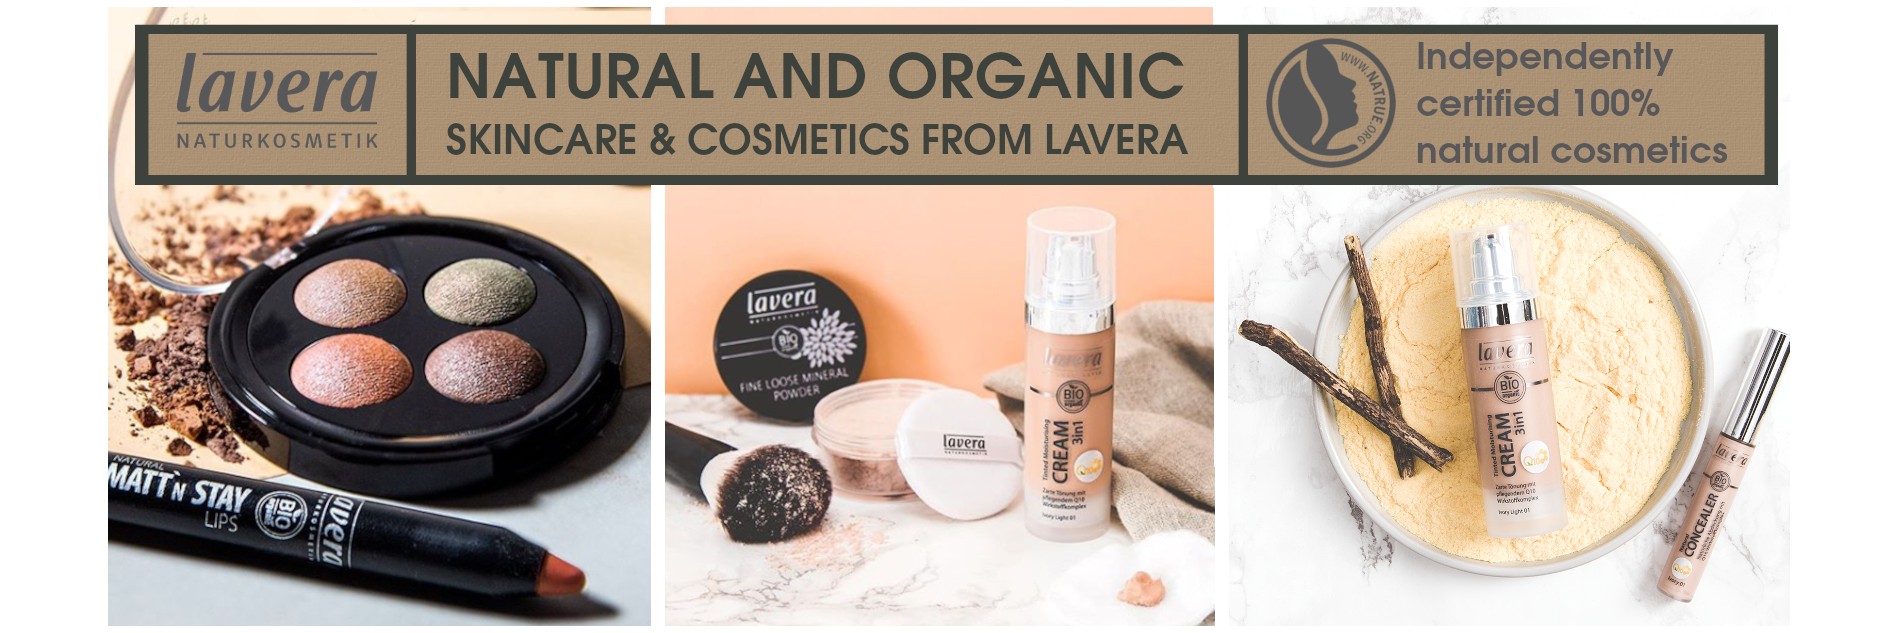 Natural and Organic Skincare and Cosmetics from Lavera